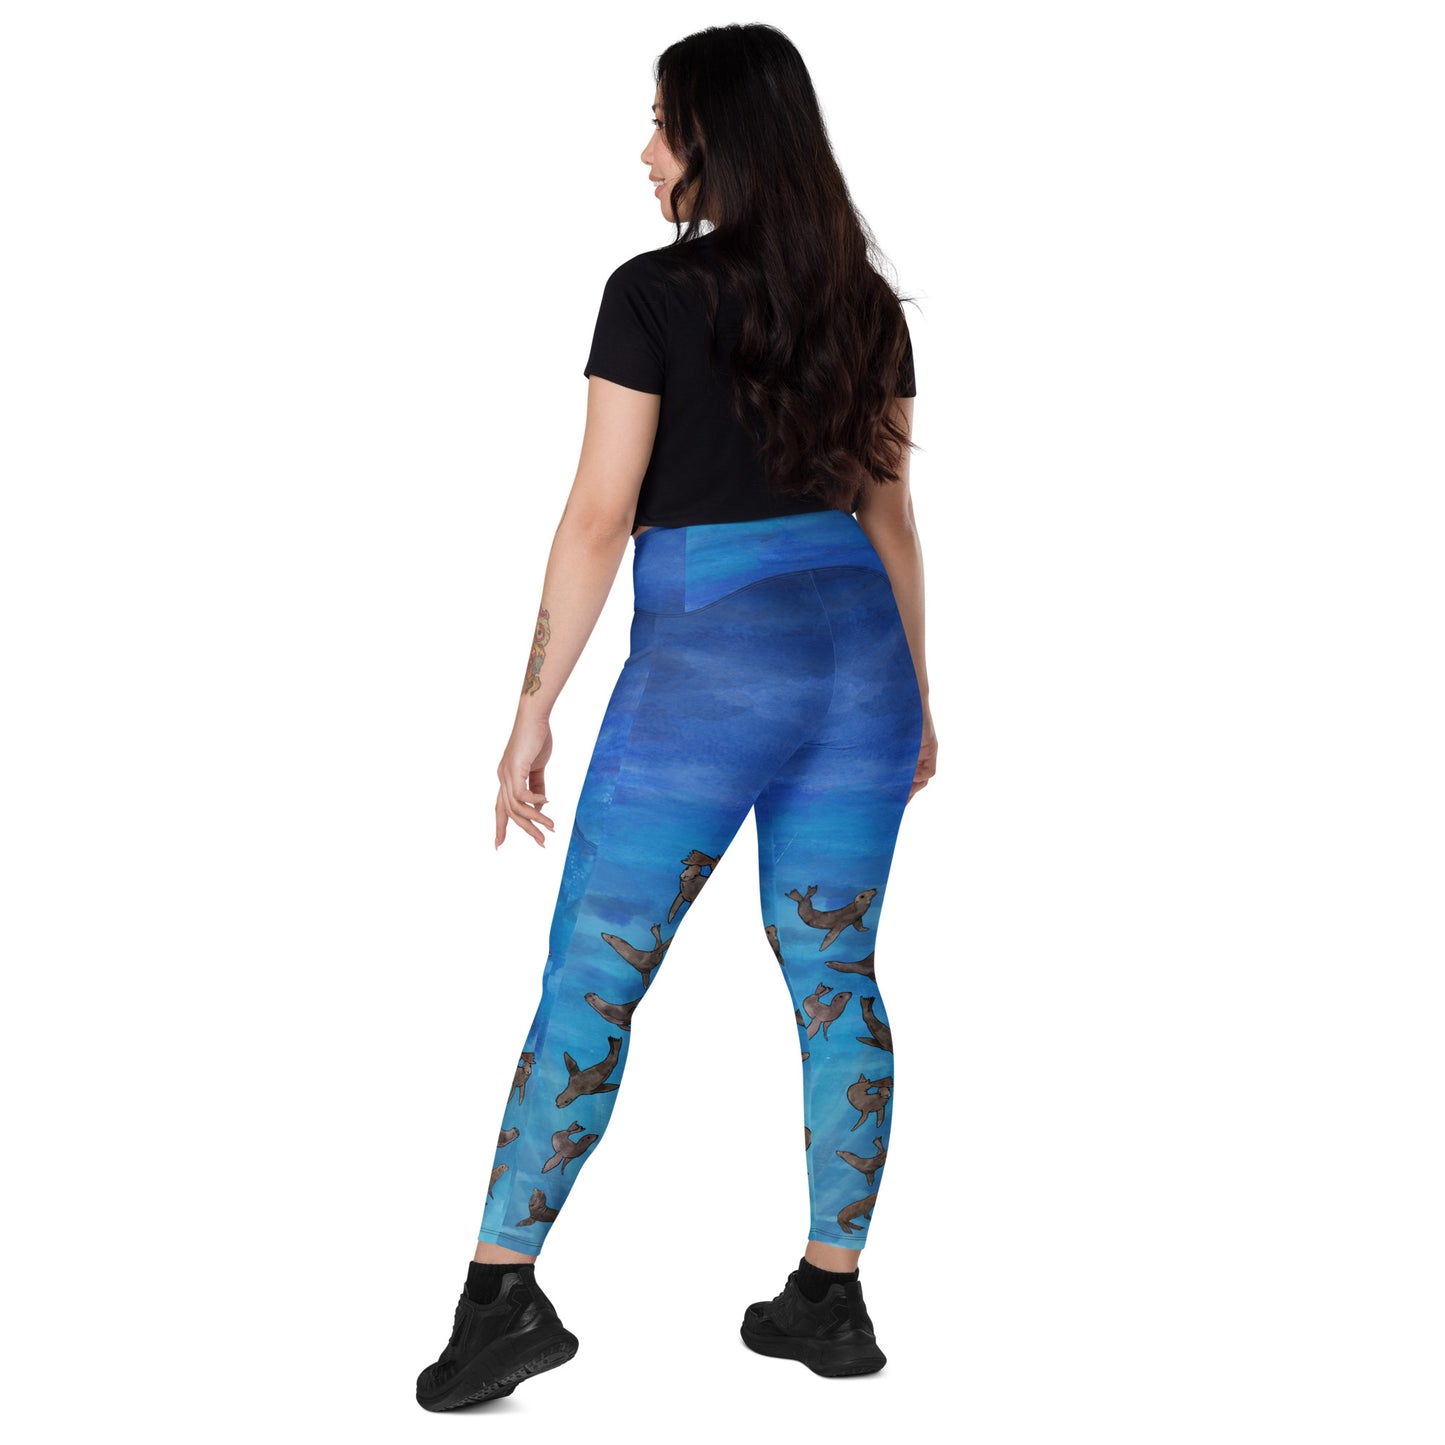 Sea Lion Crossover leggings with pockets